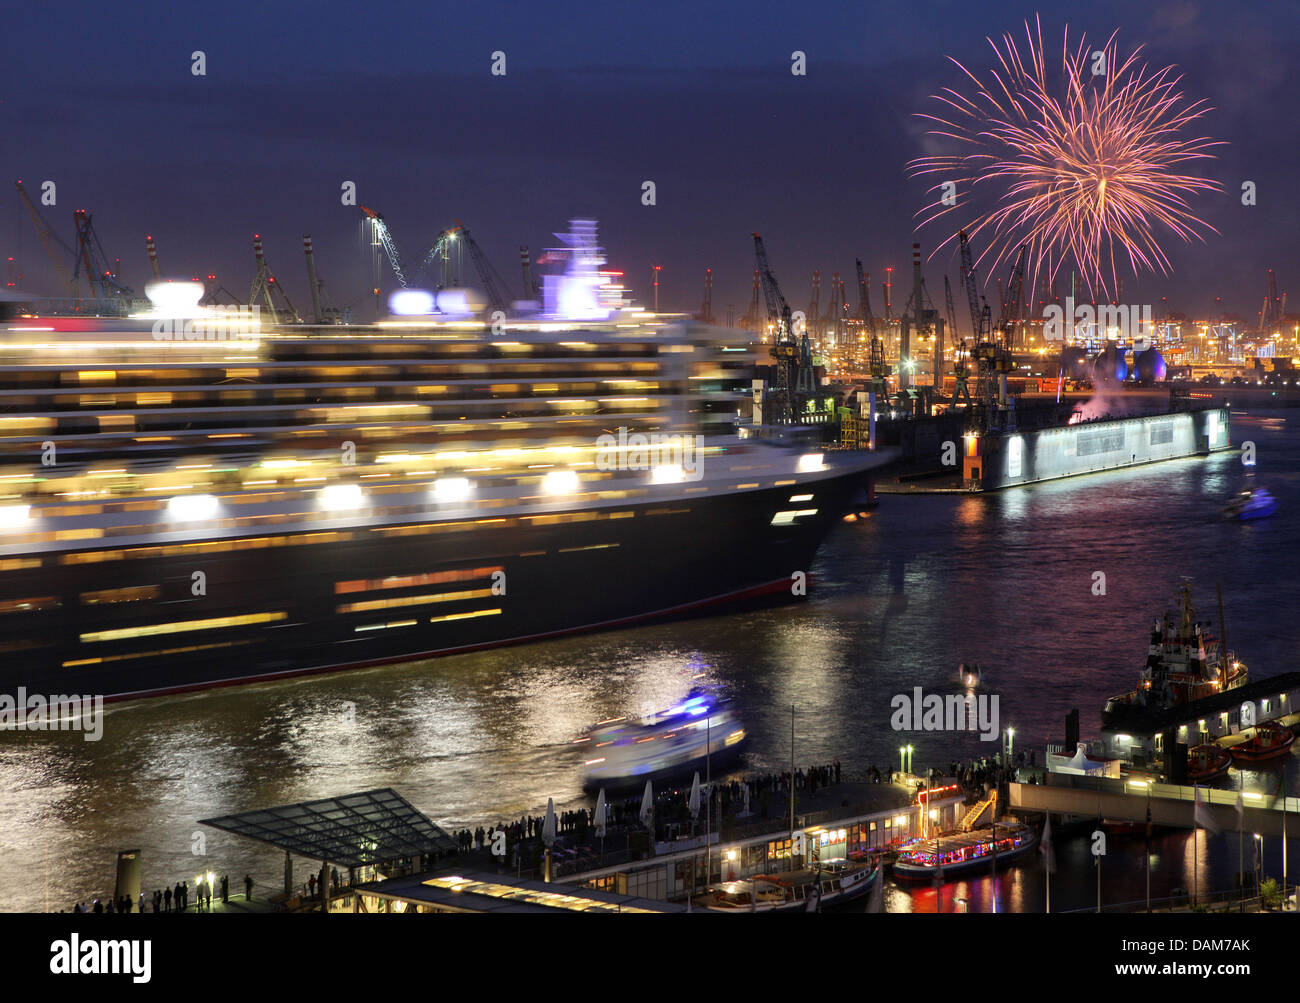 Cruise ship 'Queen Mary 2' leaves the port and is saluted with fireworks in Hamburg, Germany, 26 May 2011. The luxury cruise ship stayed in the Hamburg harbour for one day and afterwards left for Scandinavia. Photo: Bodo Marks Stock Photo